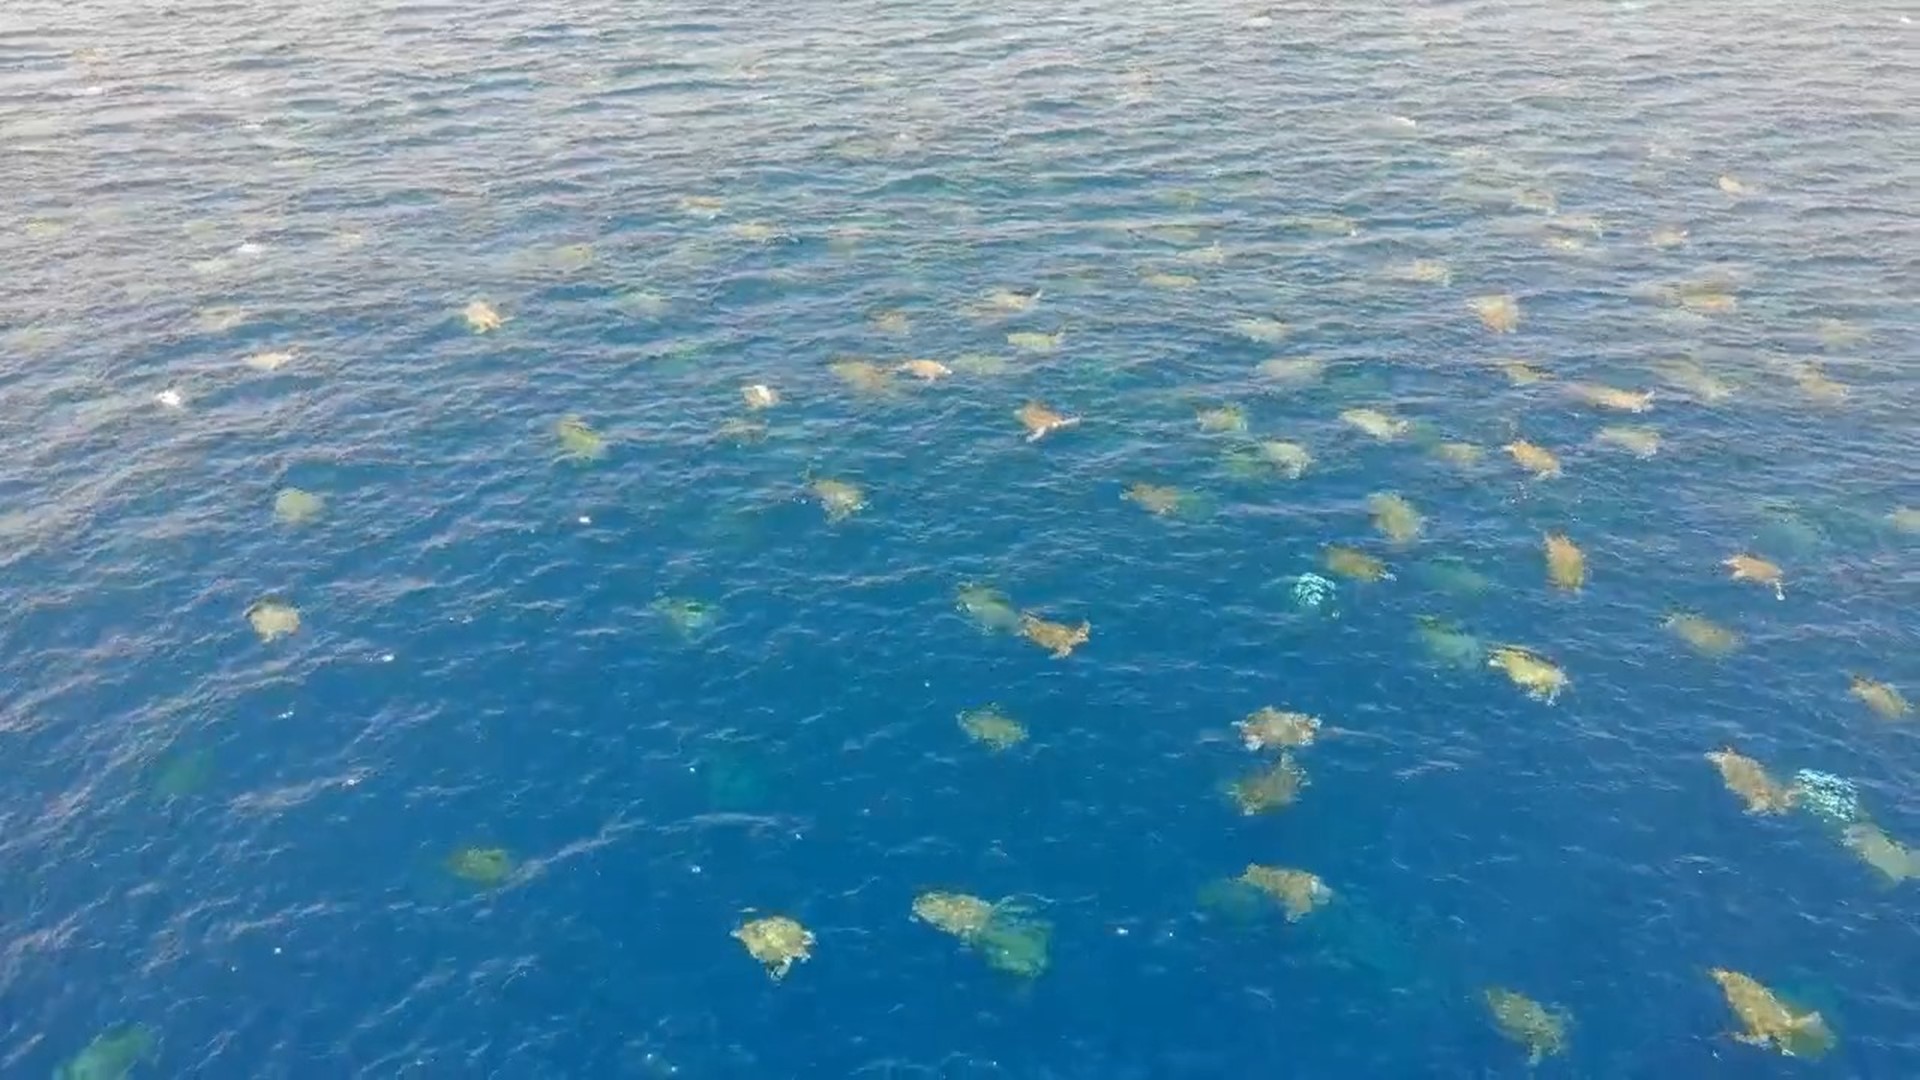 Thrilling drone video shows thousands of nesting turtles at Great Barrier Reef